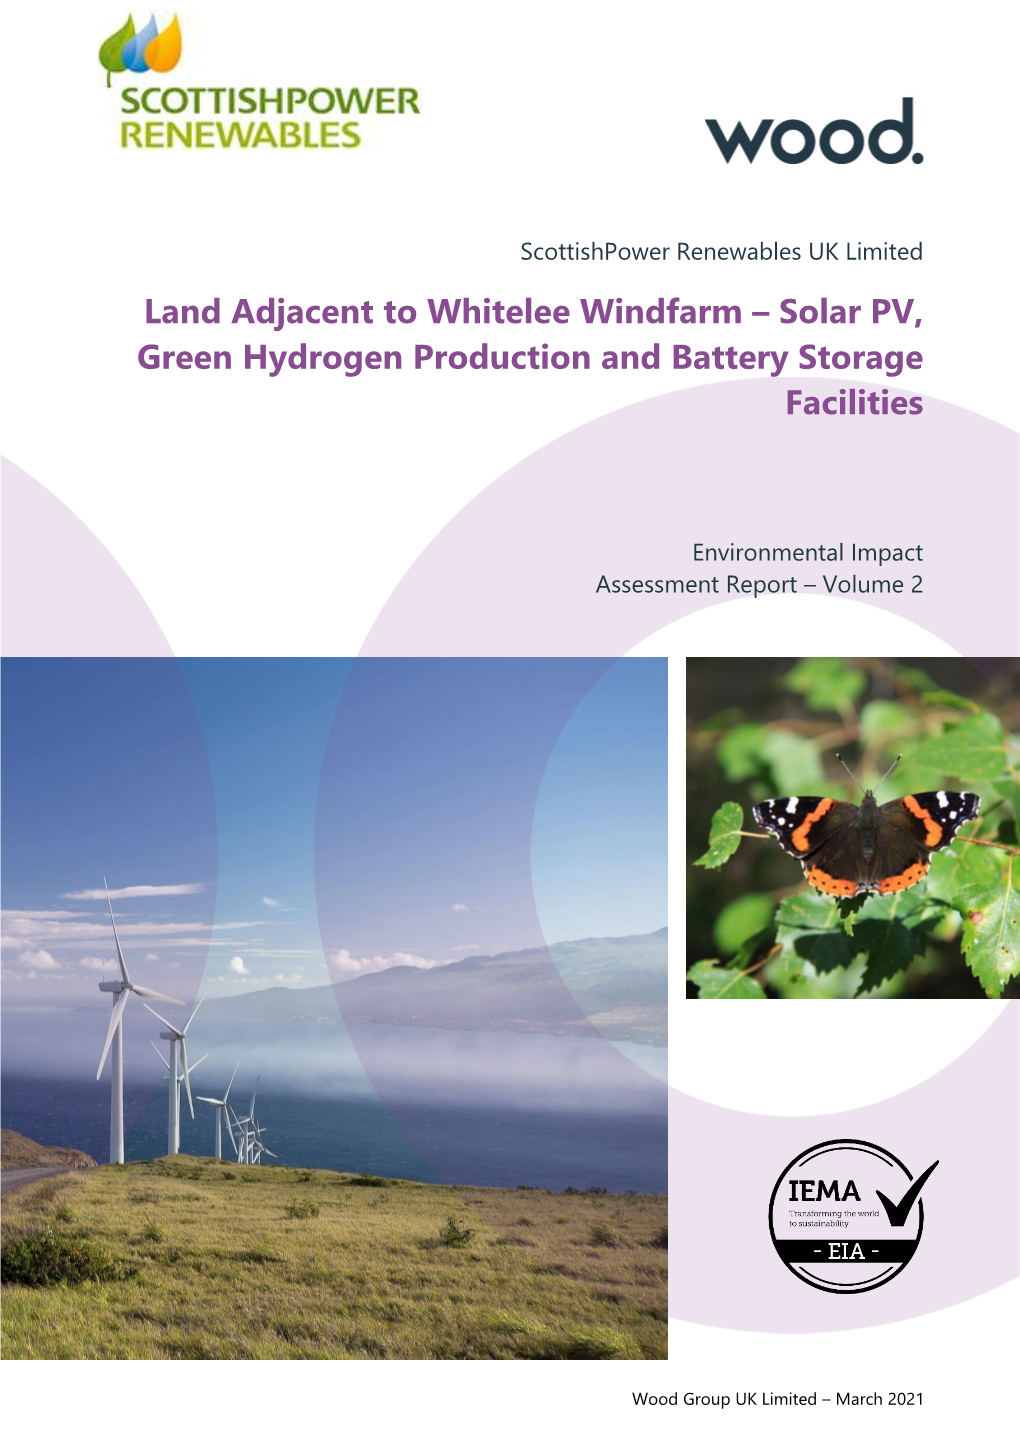 Land Adjacent to Whitelee Windfarm – Solar PV, Green Hydrogen Production and Battery Storage Facilities